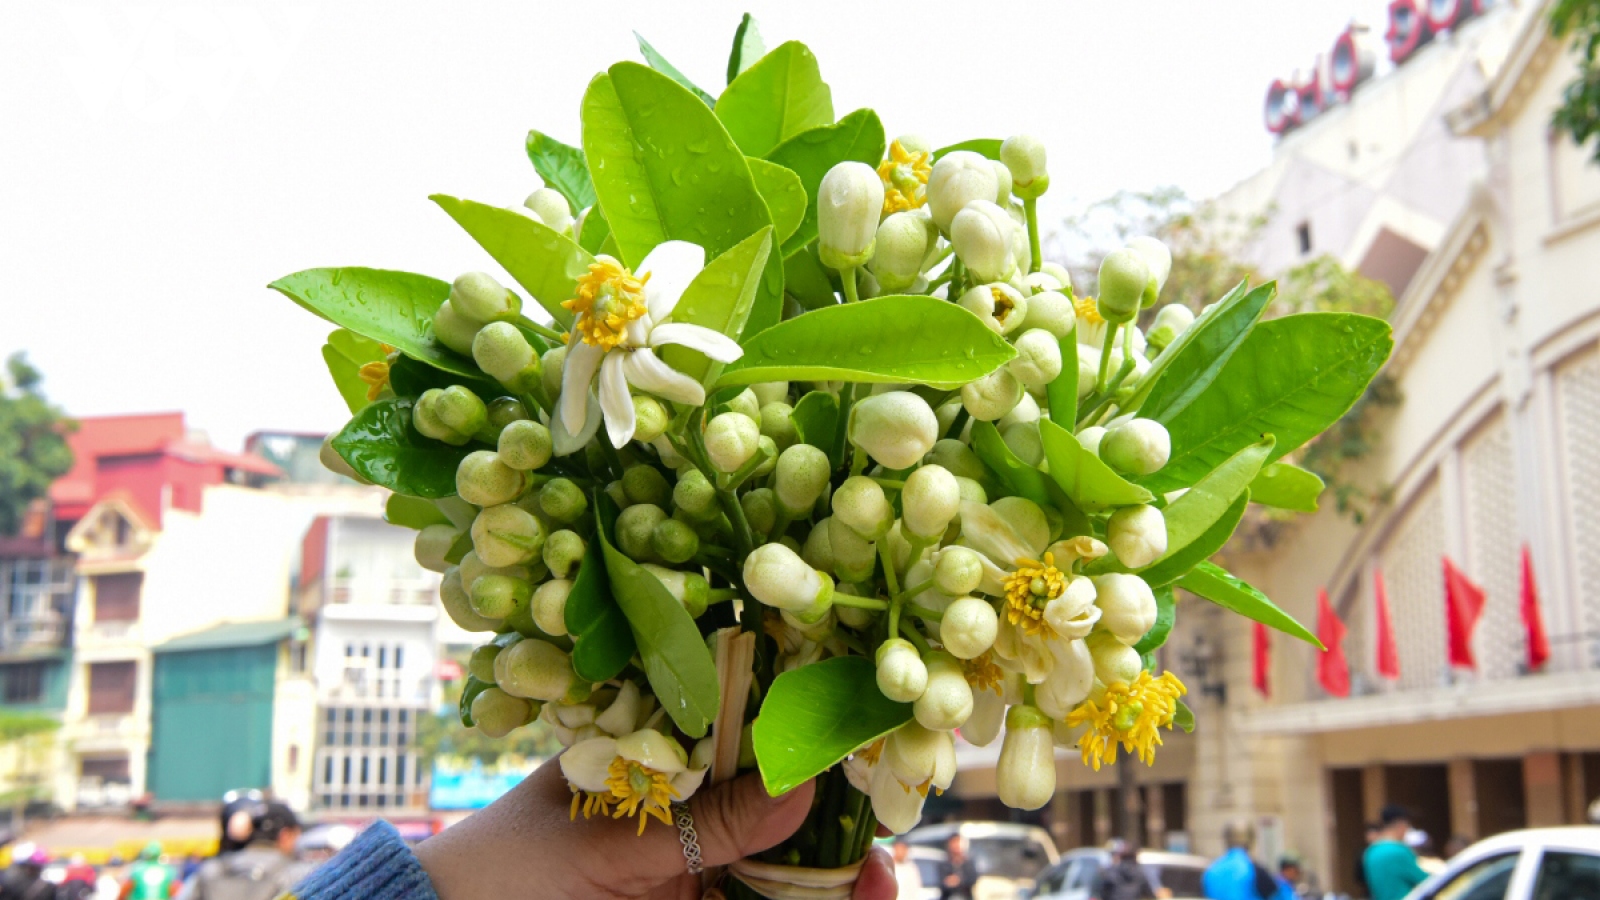 Scent of pomelo flowers fills streets of Hanoi